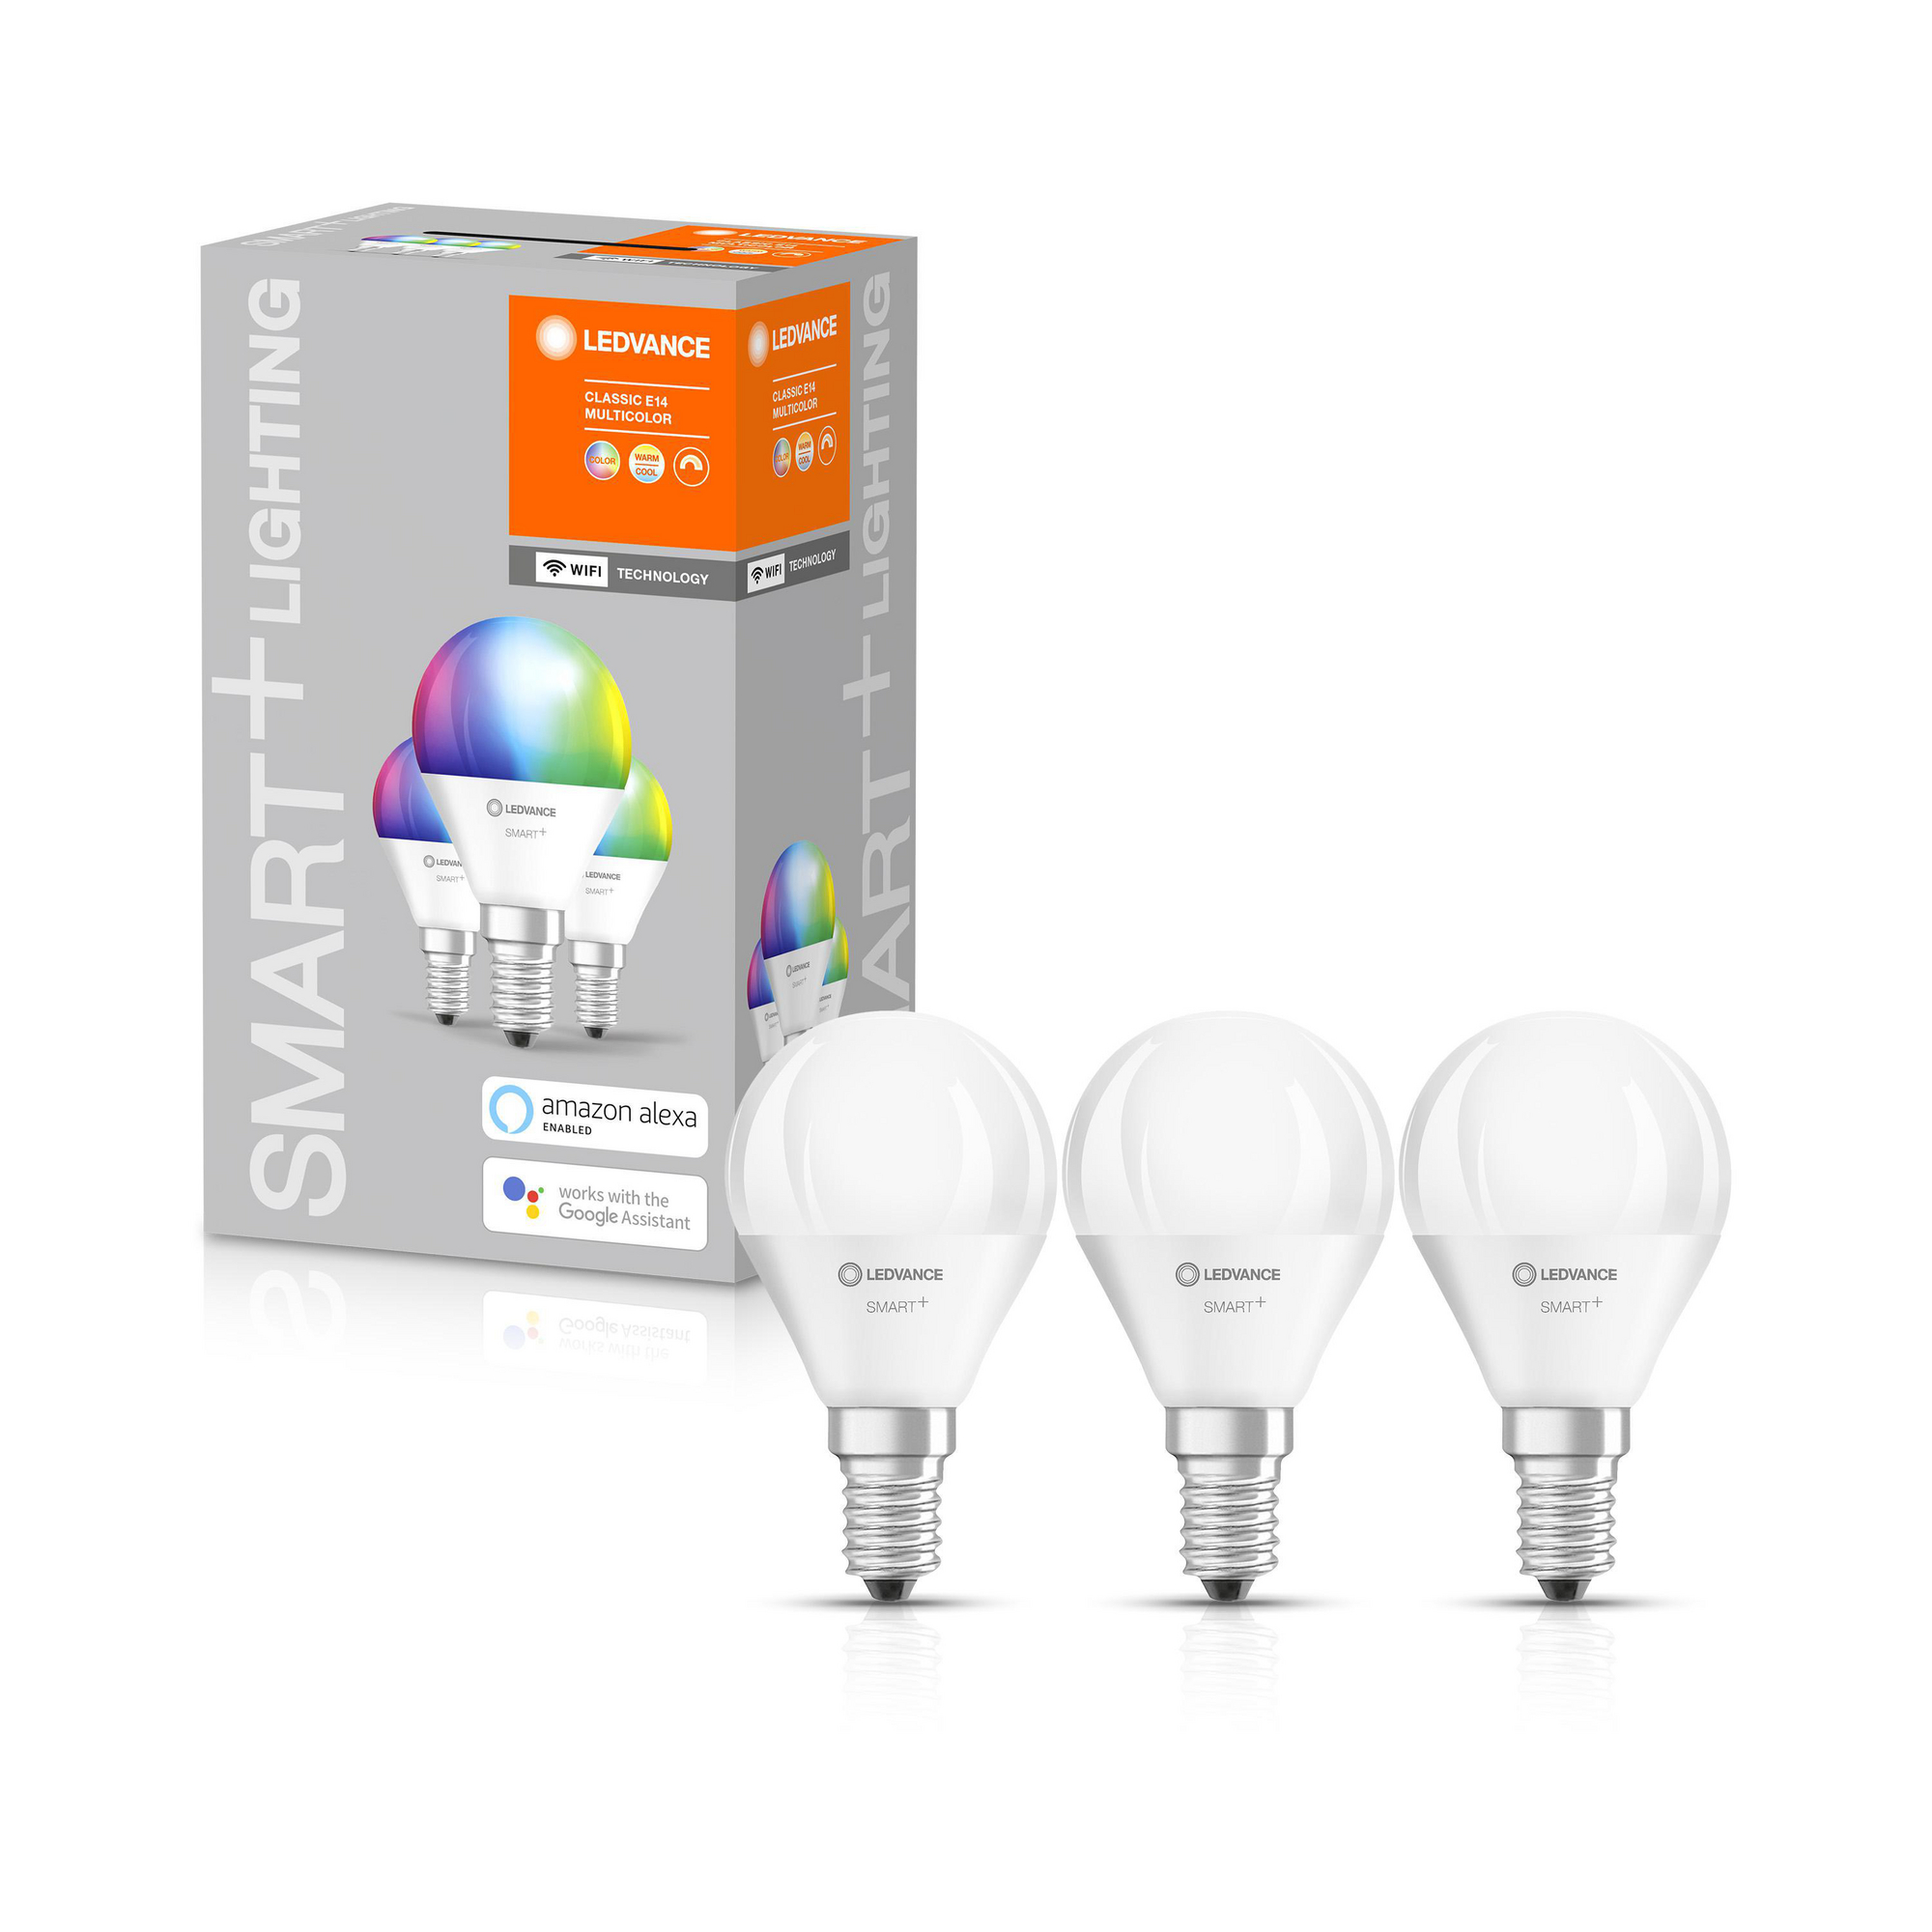 LED-RGB-Lampe 'Smart+' 8,9 cm 470 lm 5 W E14 weiß WLAN 3 Stk. + product picture